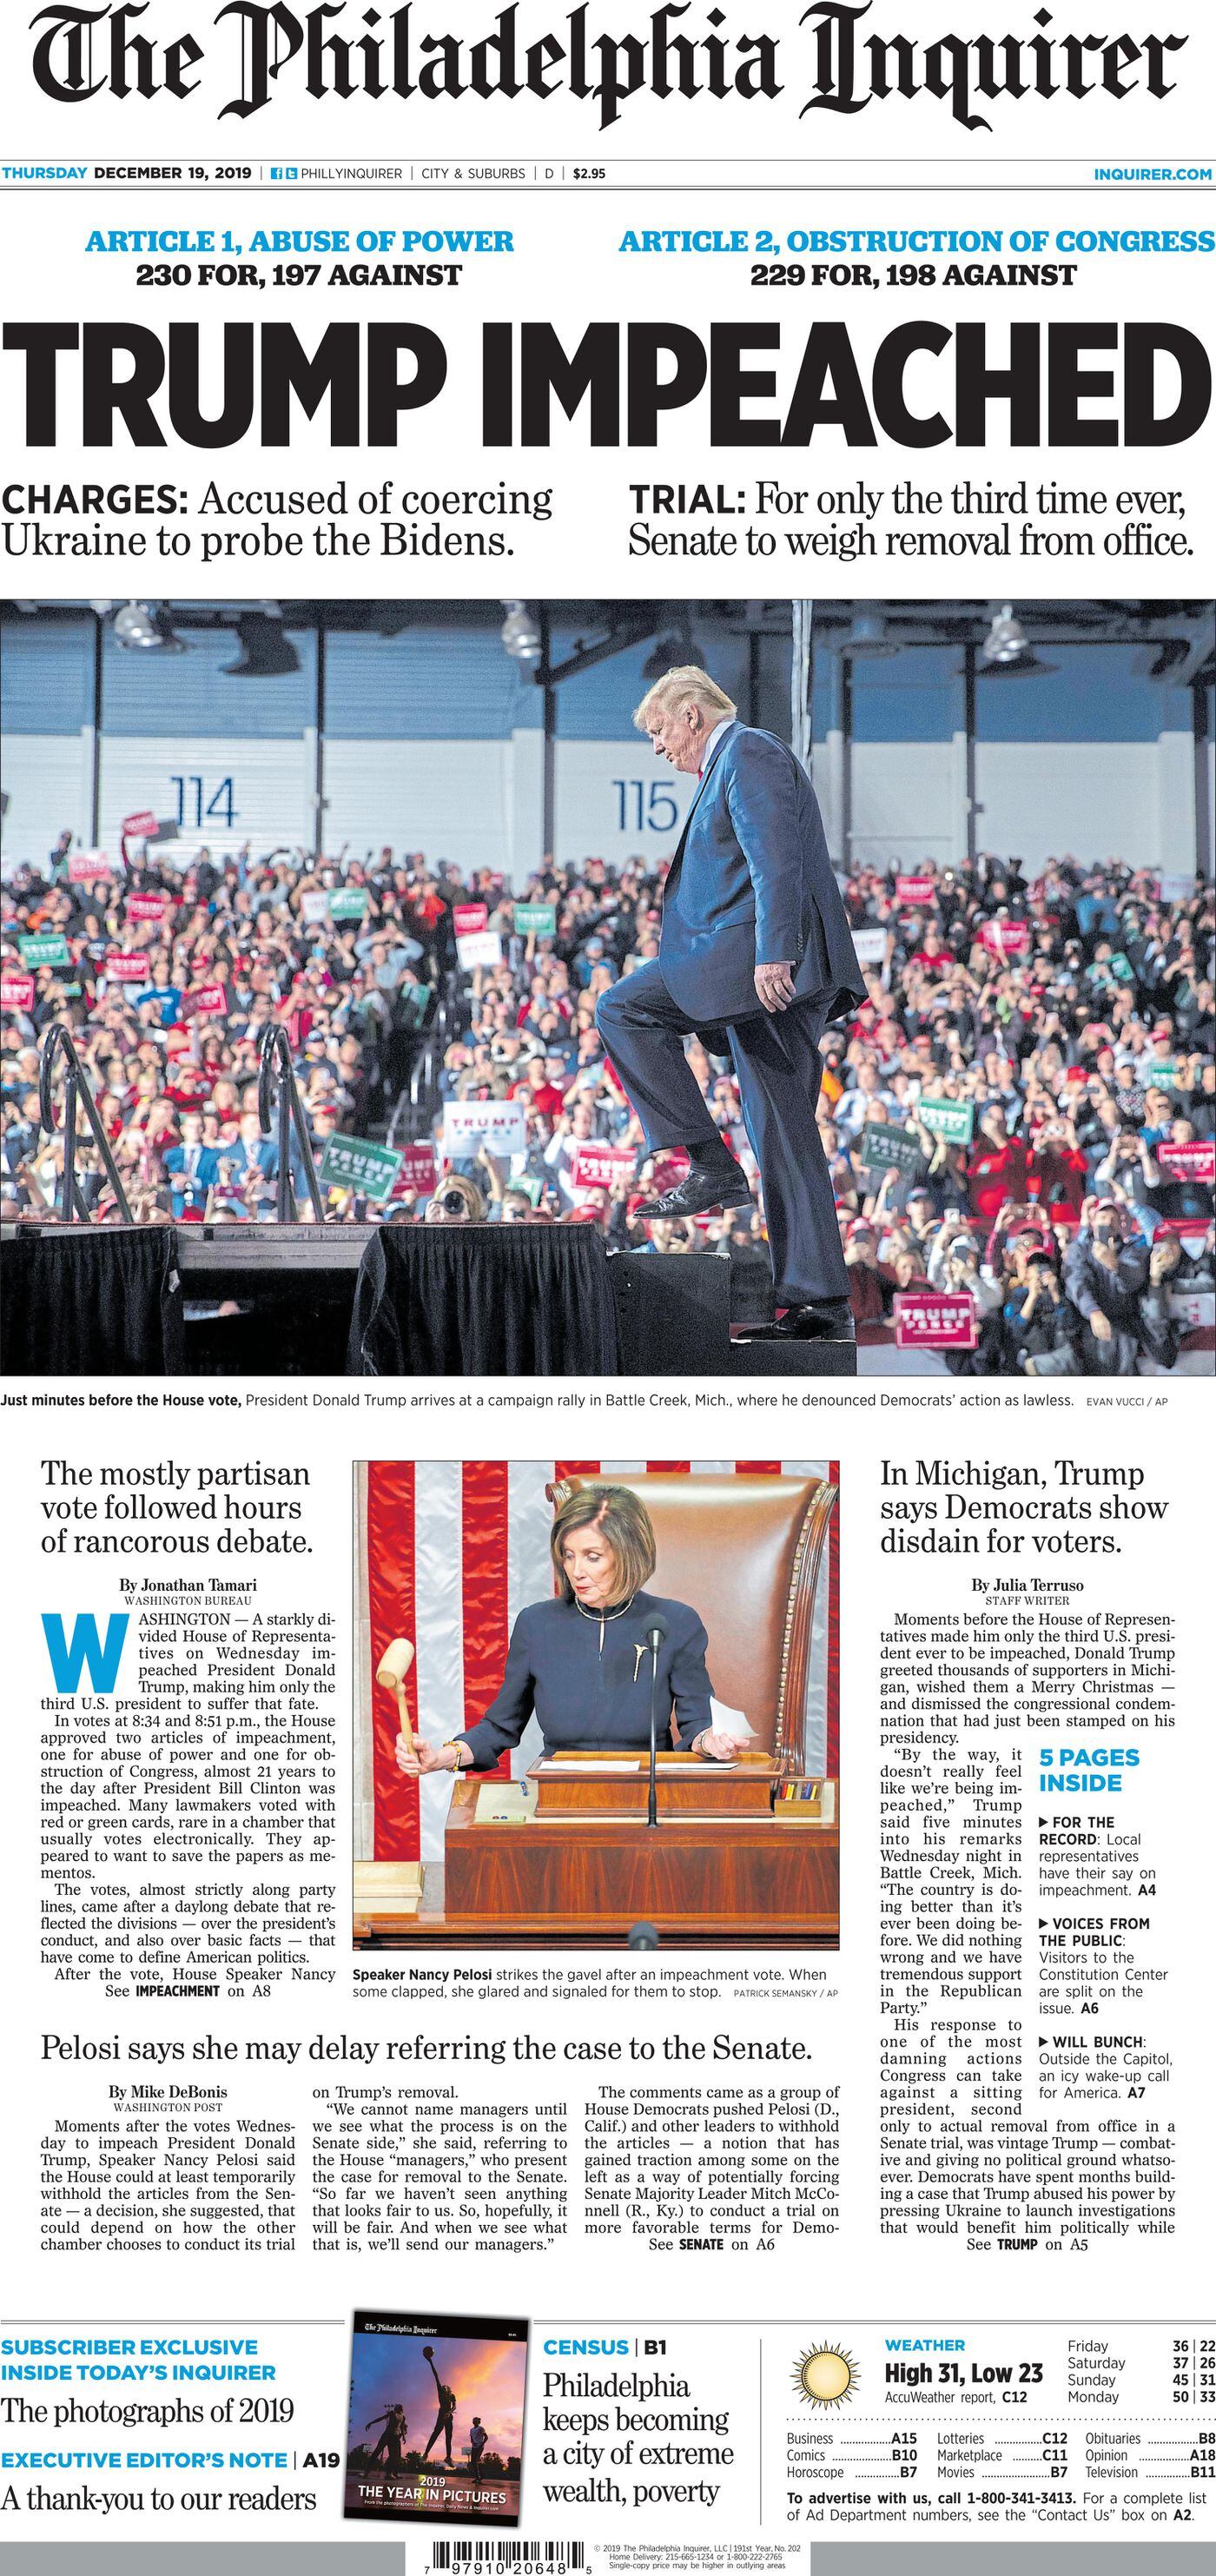 Impeachment front pages: How the Inquirer covered Trump, Clinton, and ...